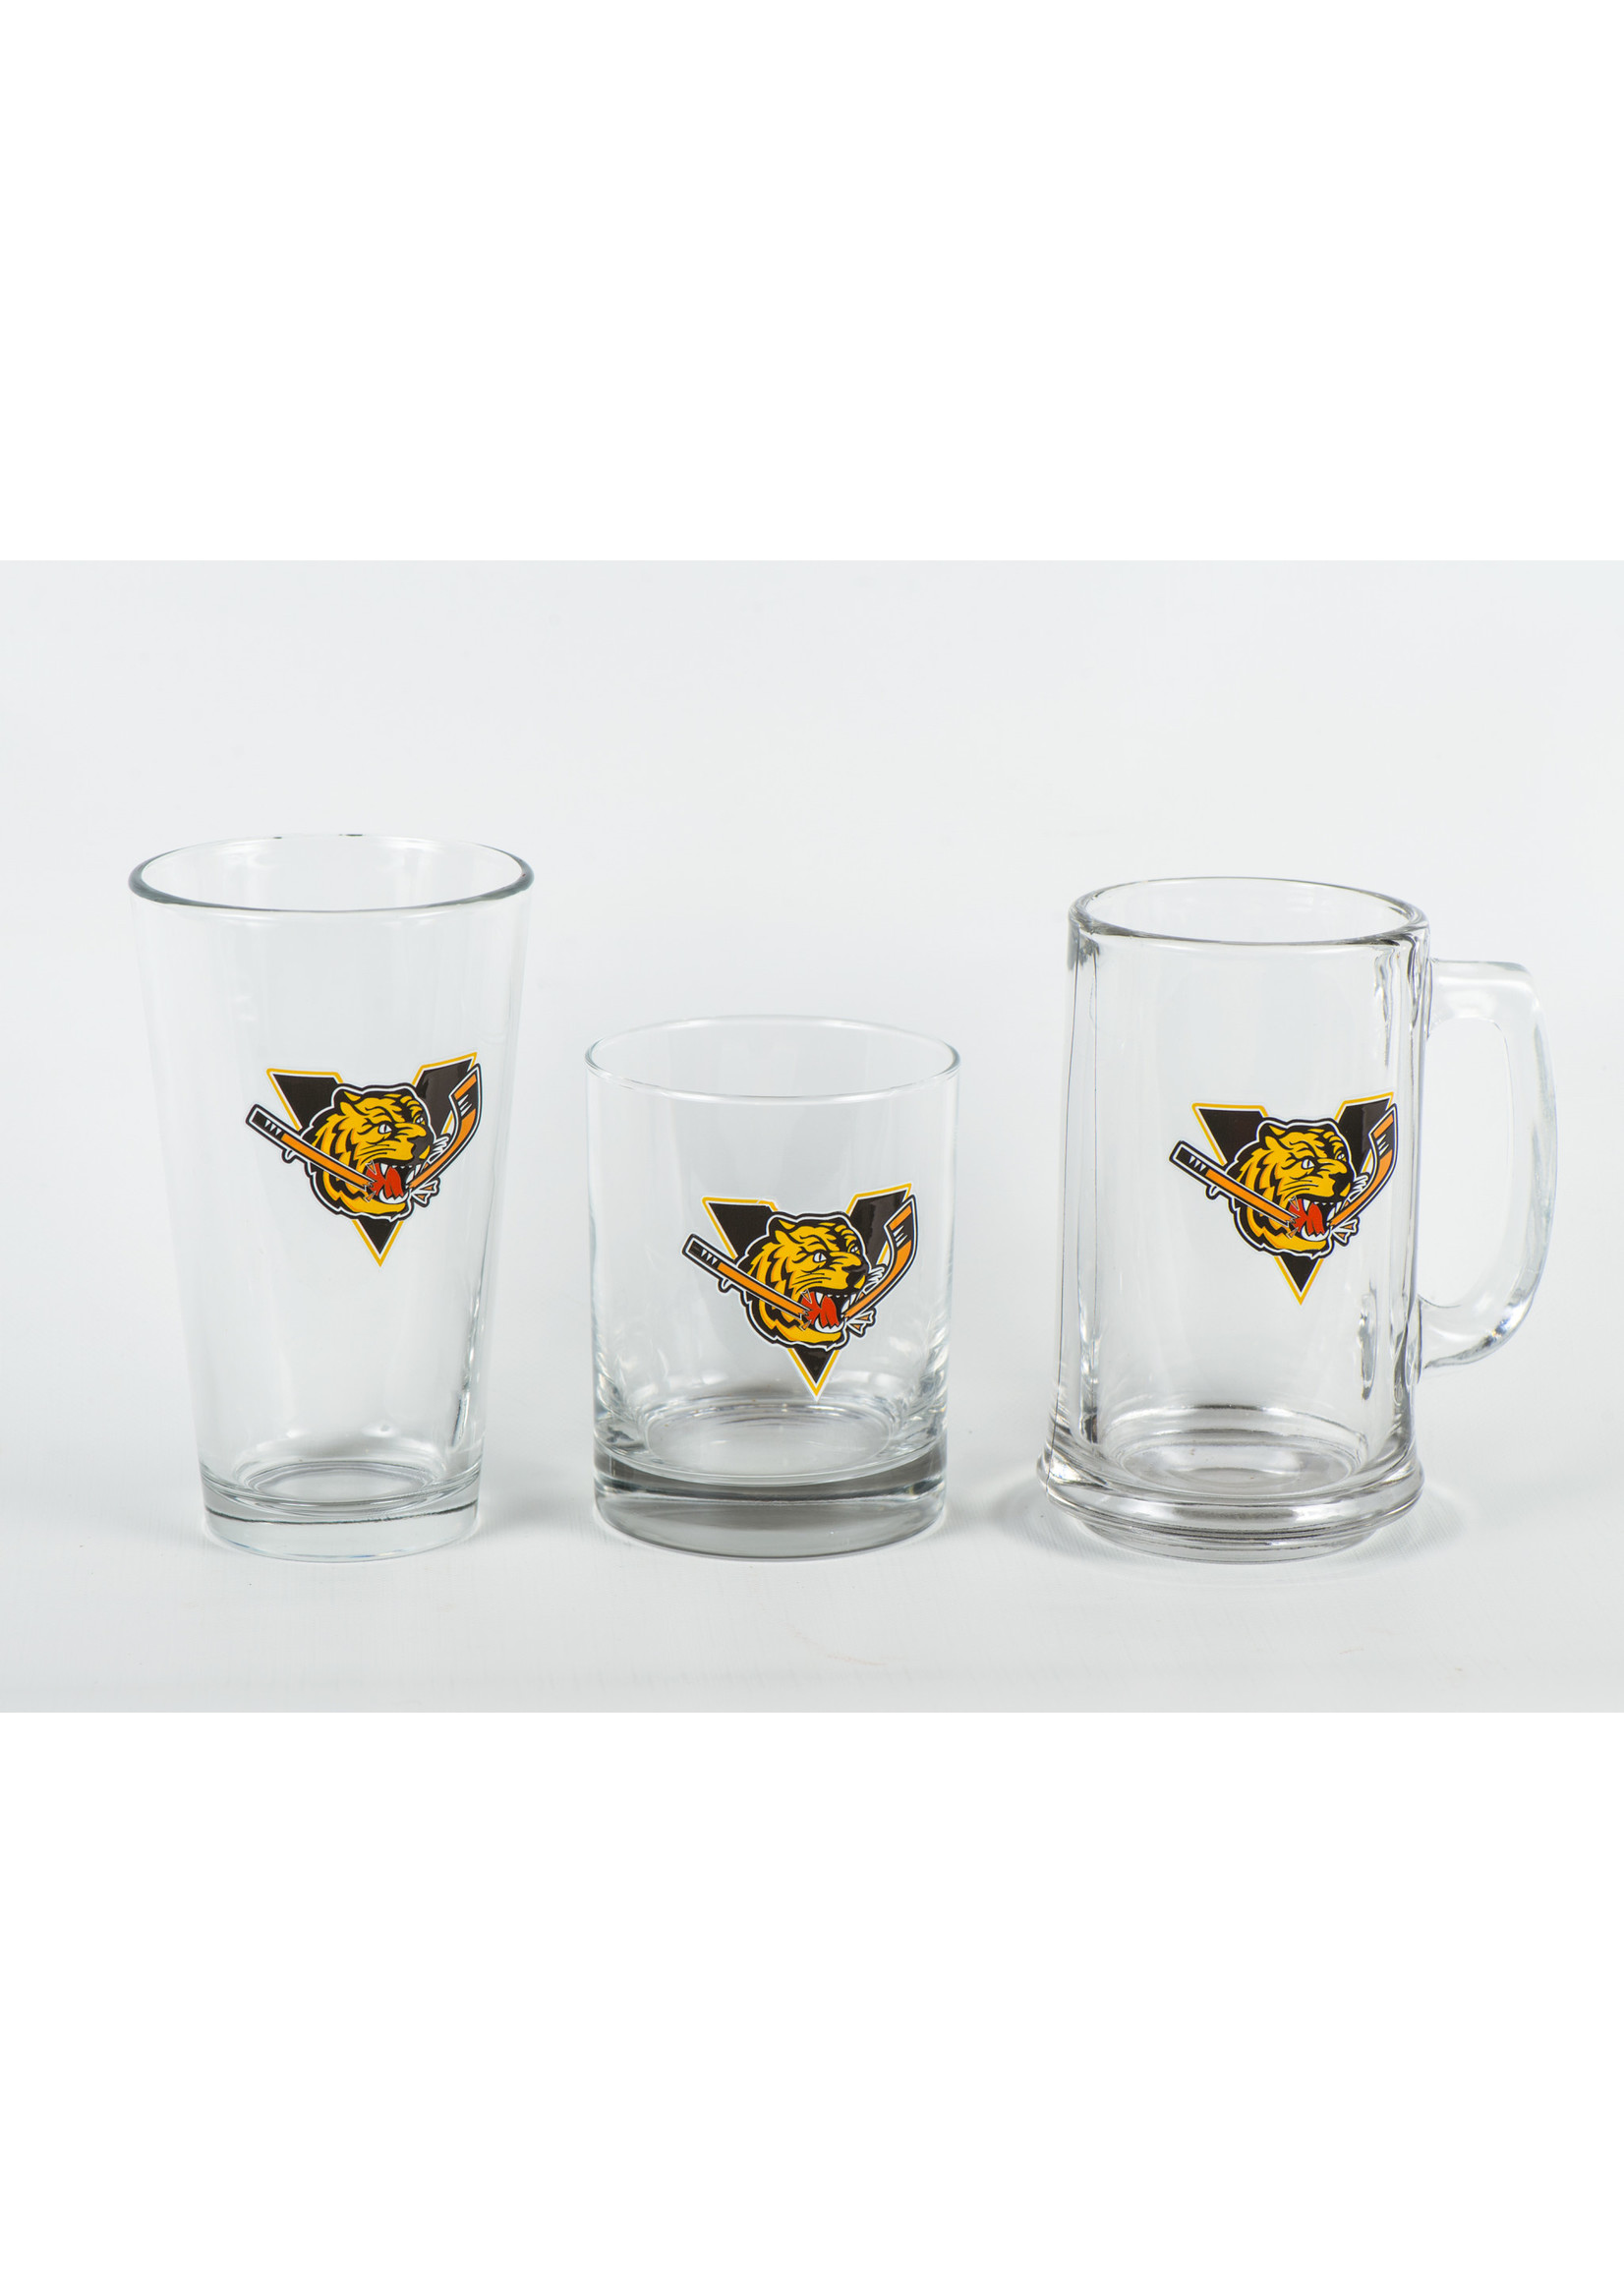 Verre style "Buck" 15 onces